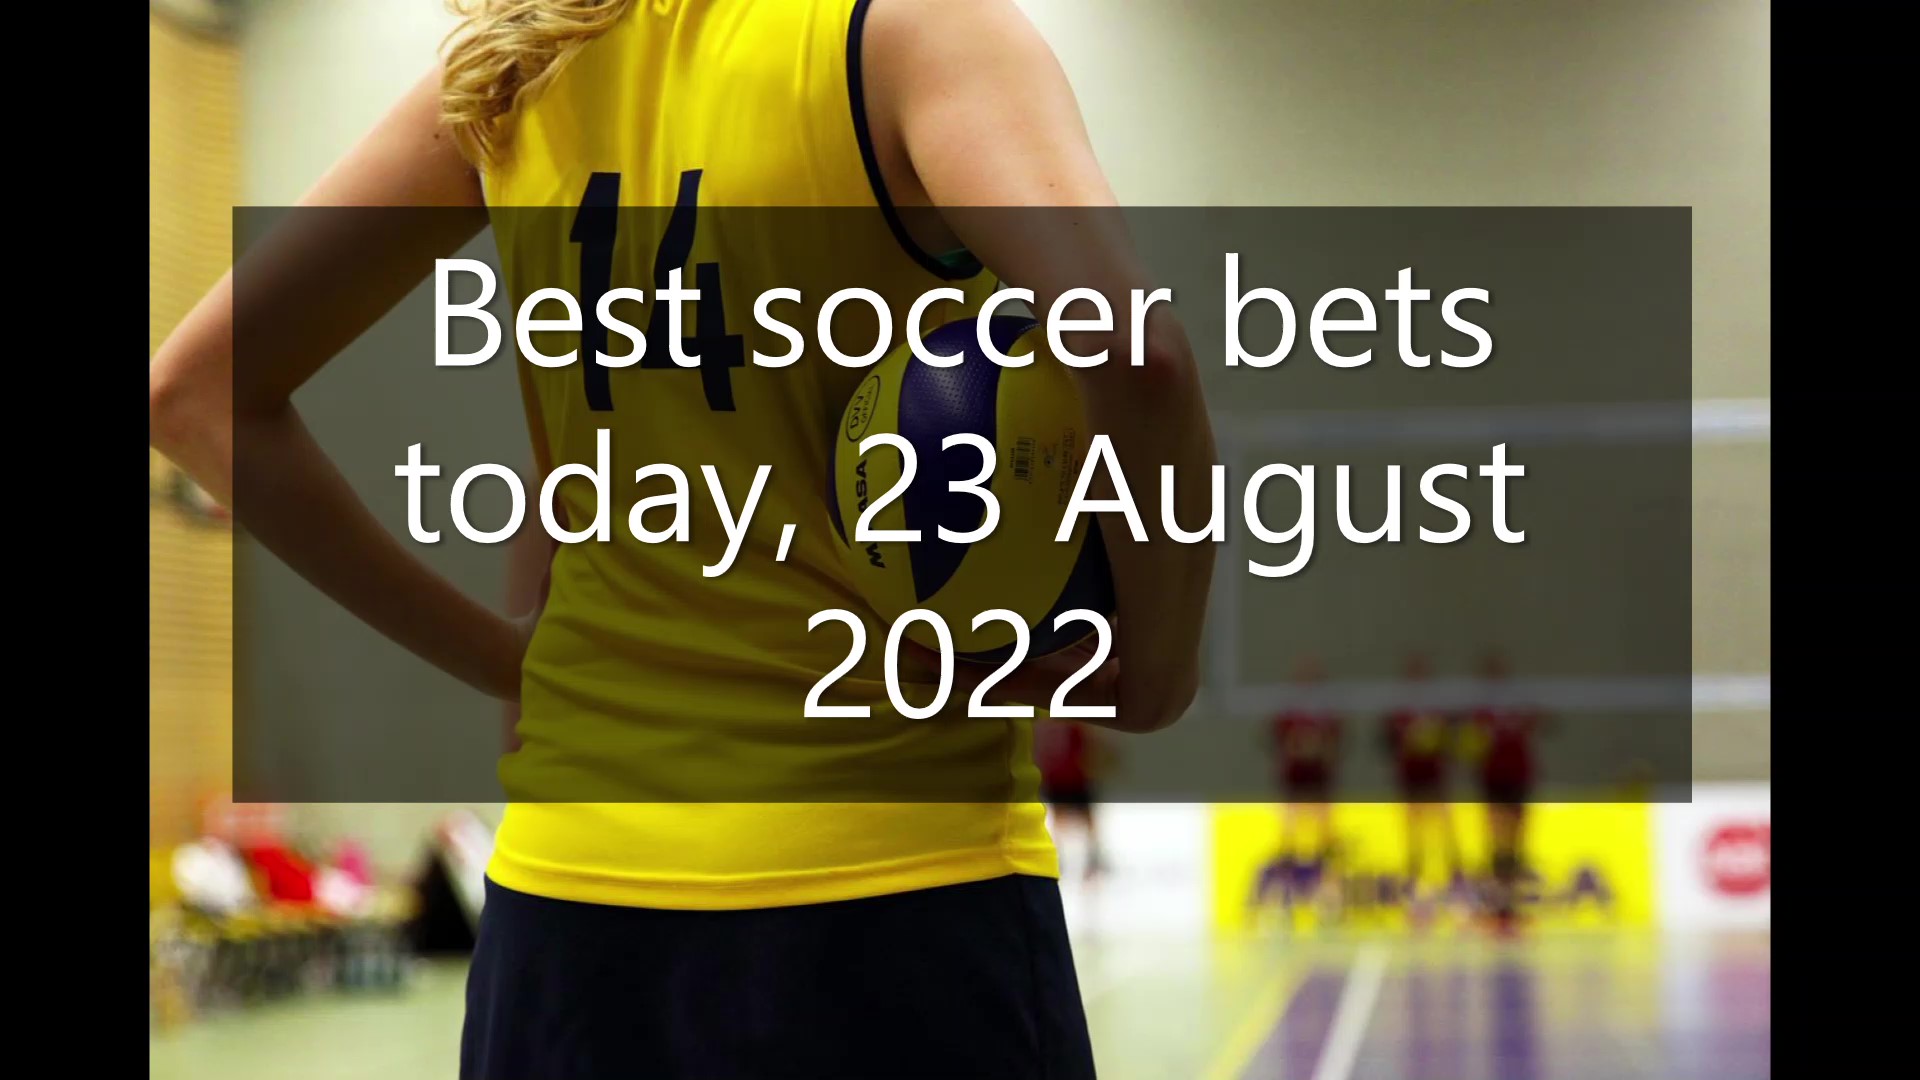 Best soccer bets today, 23 August 2022